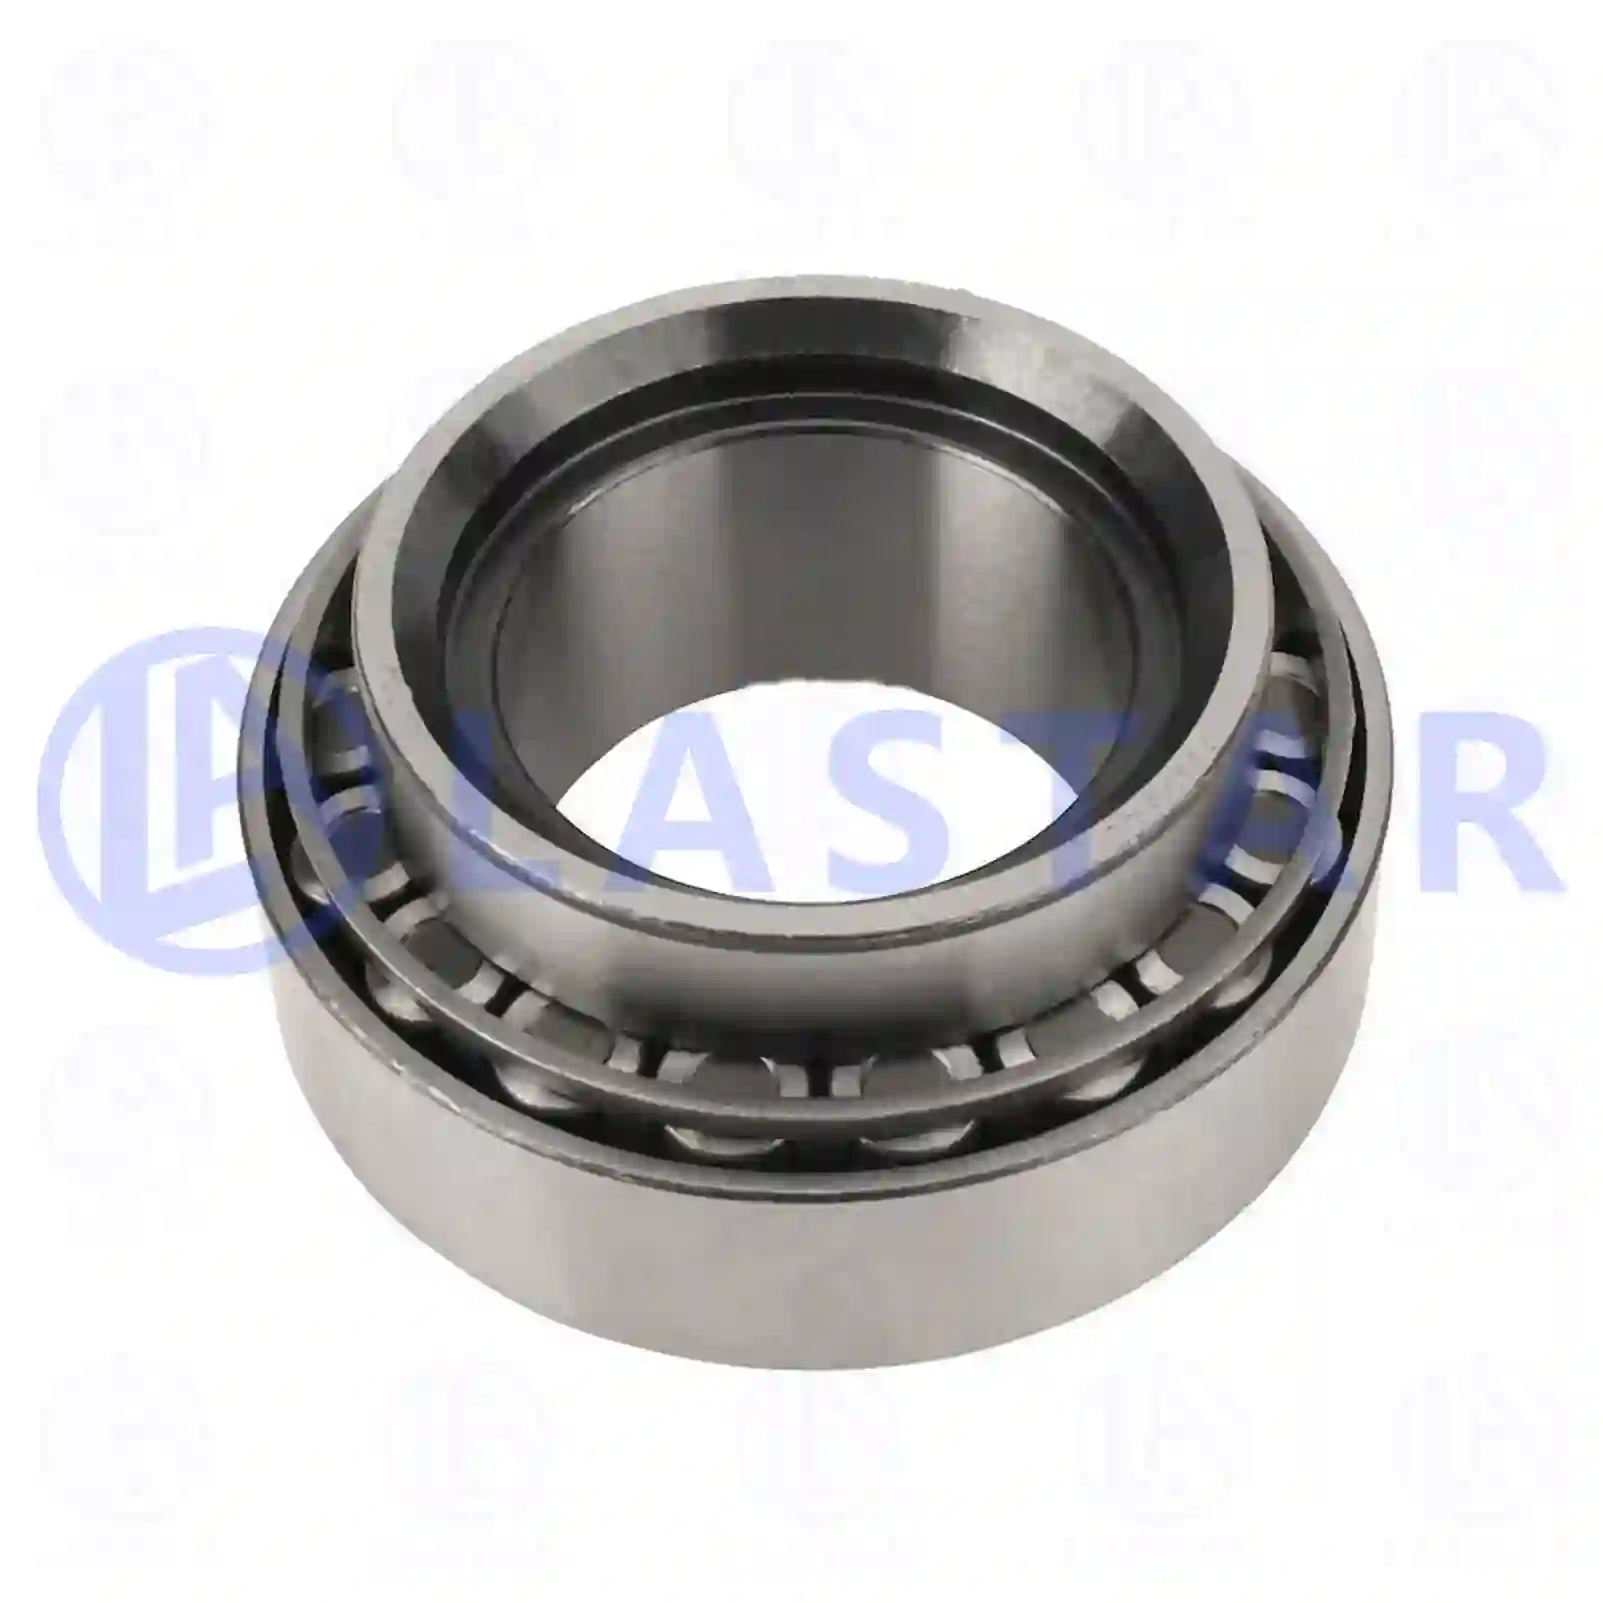 Hub Tapered roller bearing, la no: 77726325 ,  oem no:0049812405, 0059813005, 0059813105, 0059818805, 6691383000, 6691383000E, 0870117516, 260532000 Lastar Spare Part | Truck Spare Parts, Auotomotive Spare Parts